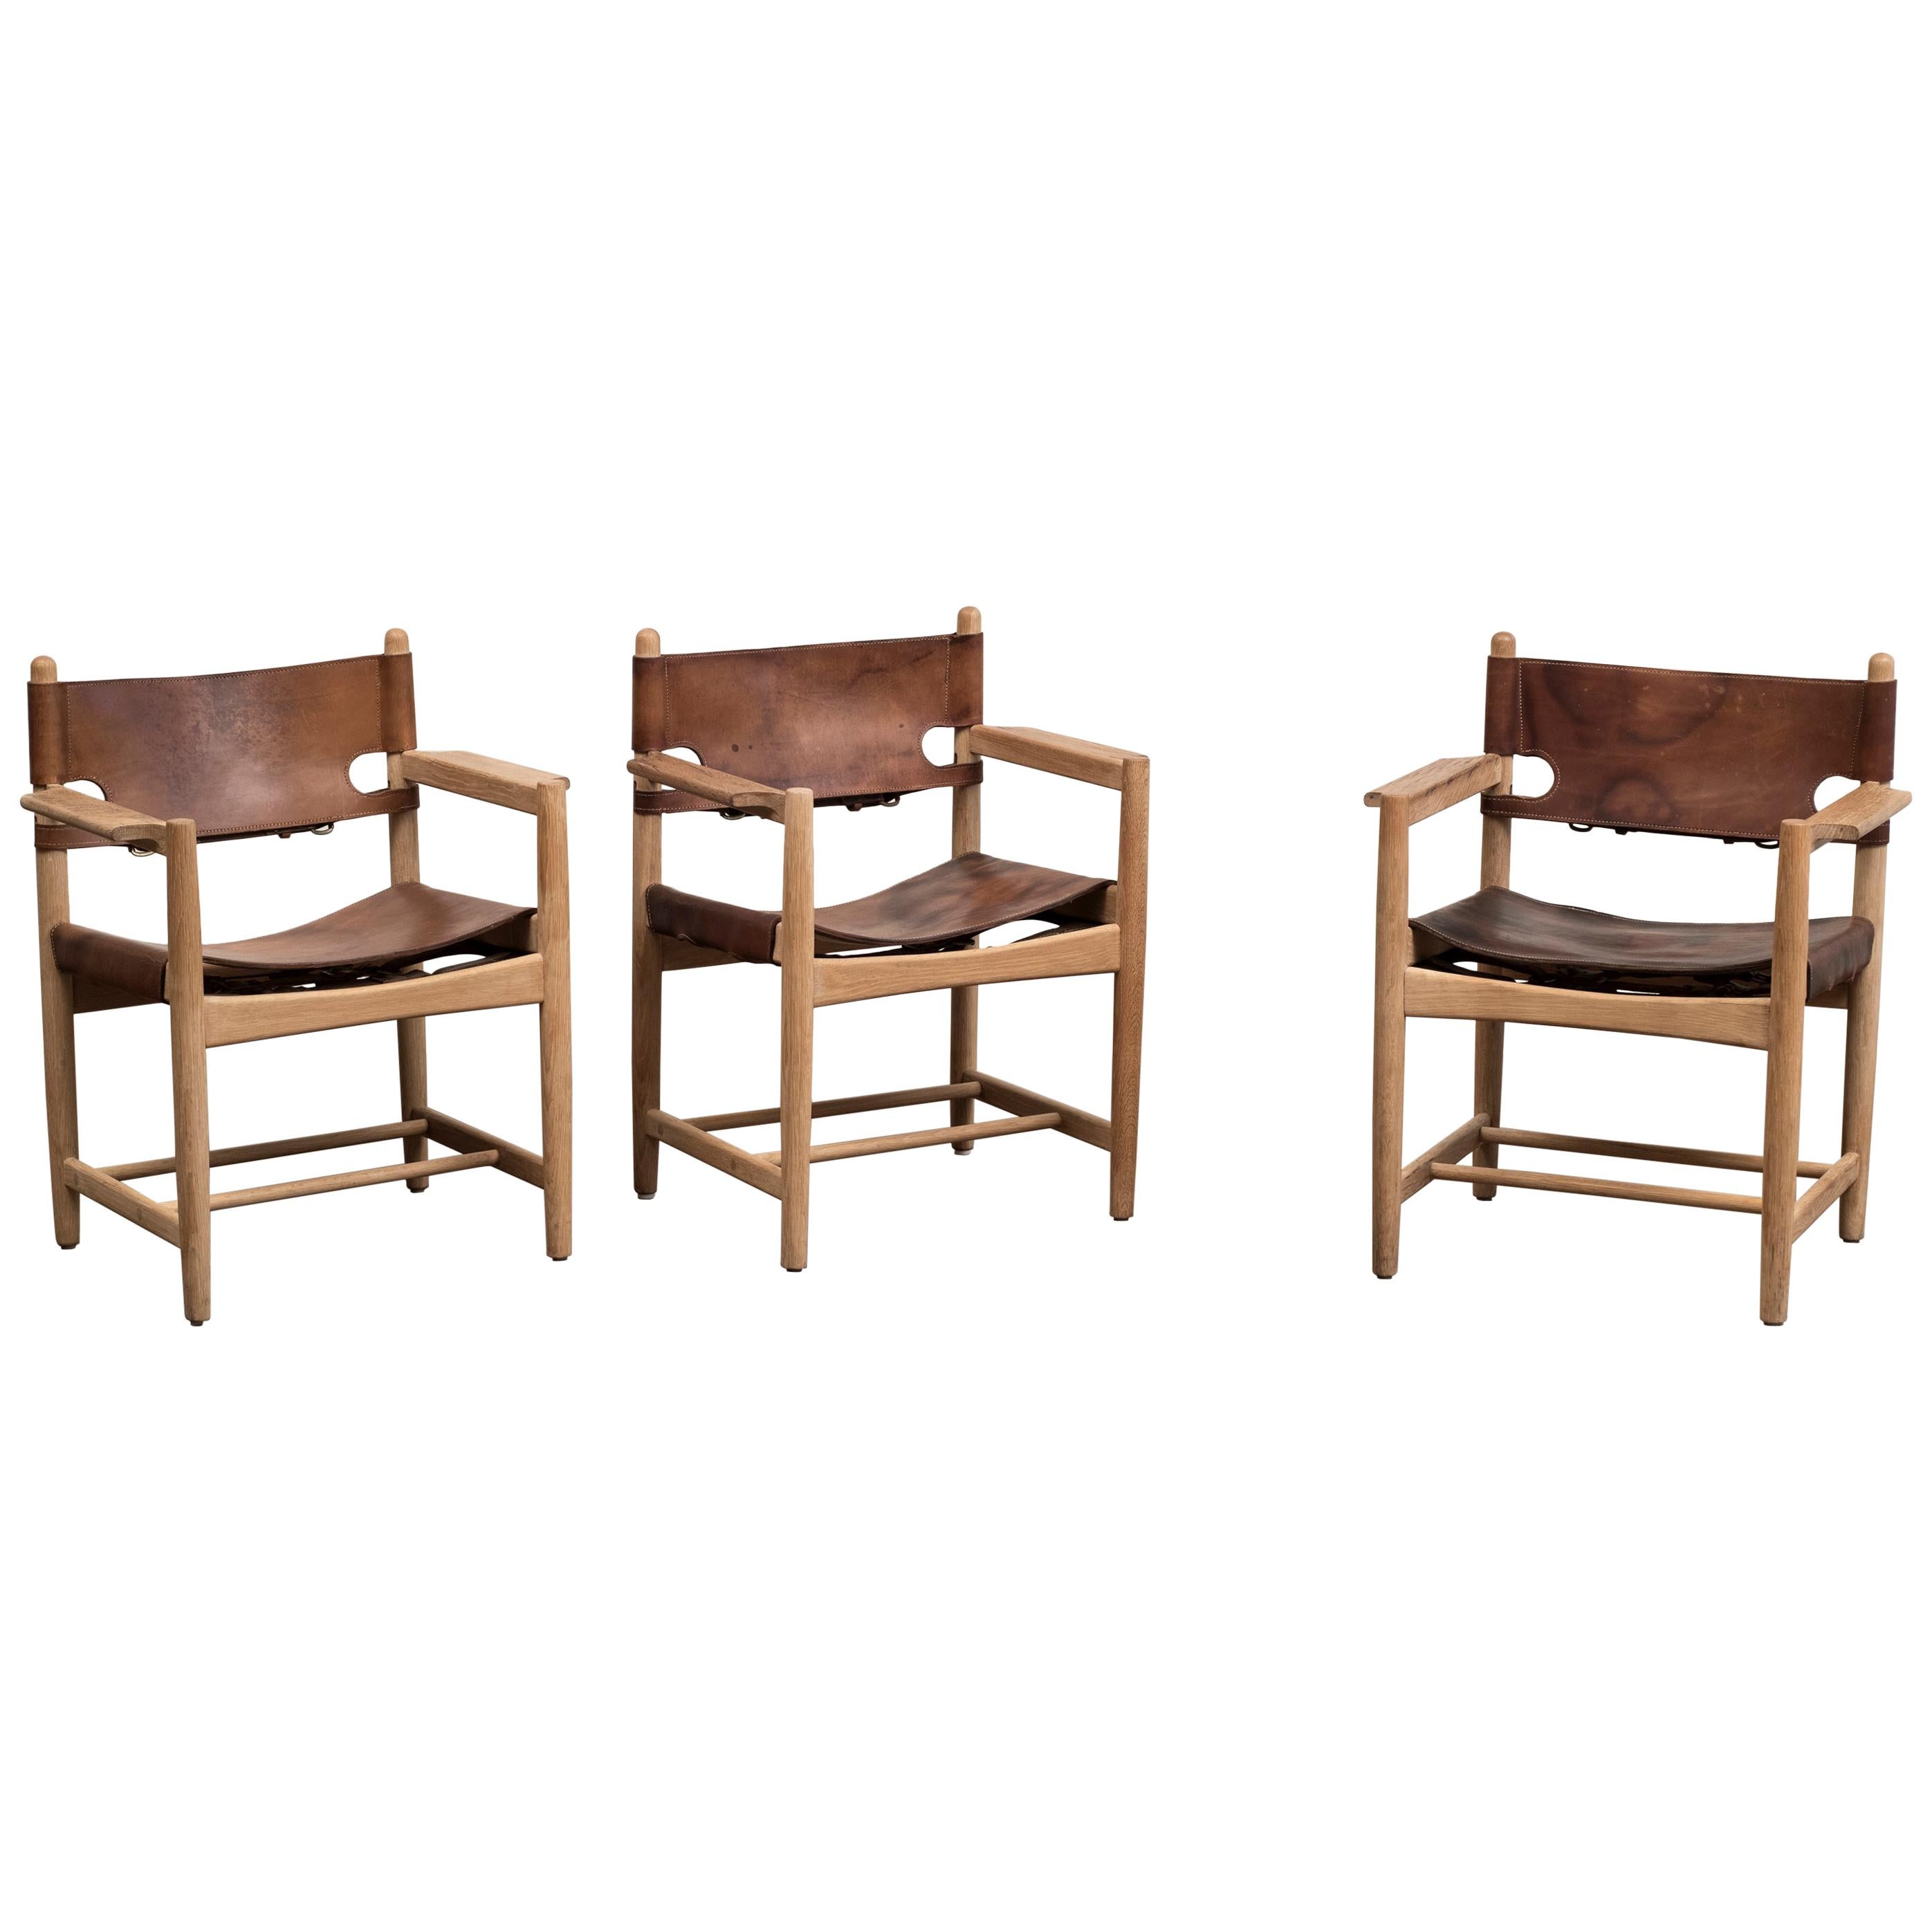 Set of Three Hunting Armchairs Chairs by Borge Mogensen for Fredericia, Denmark